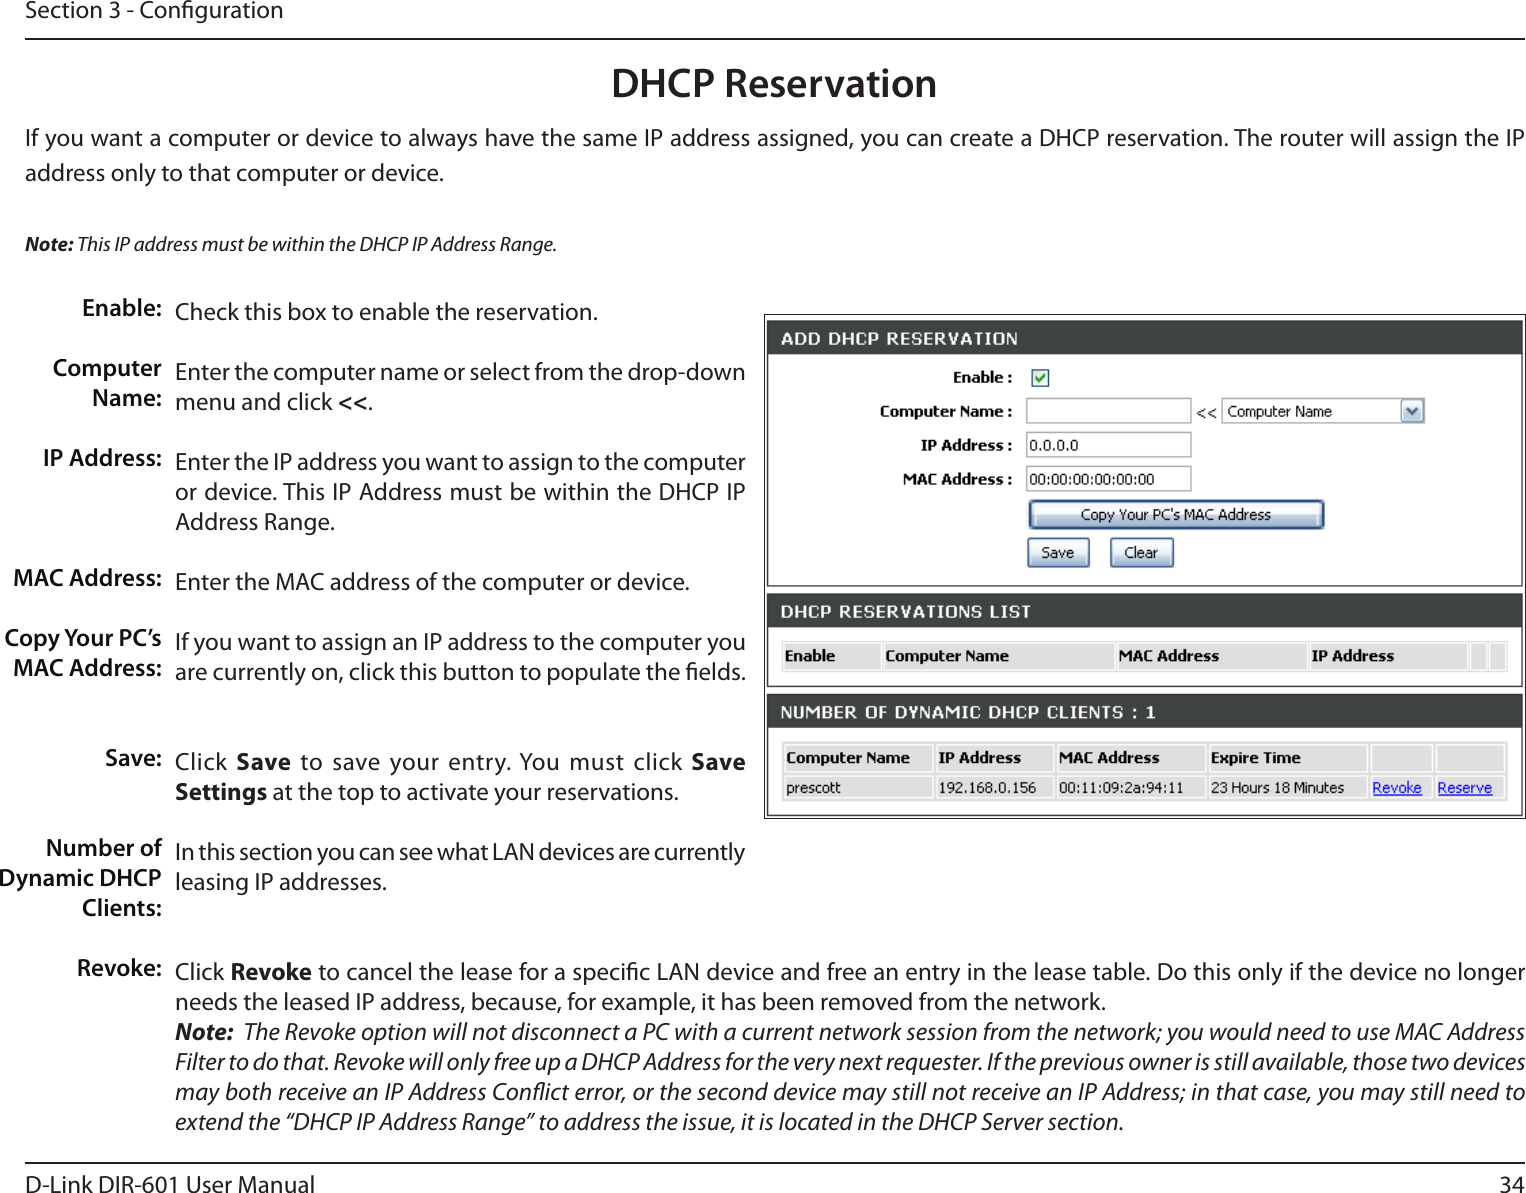 34D-Link DIR-601 User ManualSection 3 - CongurationDHCP ReservationIf you want a computer or device to always have the same IP address assigned, you can create a DHCP reservation. The router will assign the IP address only to that computer or device. Note: This IP address must be within the DHCP IP Address Range.Check this box to enable the reservation.Enter the computer name or select from the drop-down menu and click &lt;&lt;.Enter the IP address you want to assign to the computer or device. This IP Address must be within the DHCP IP Address Range.Enter the MAC address of the computer or device.If you want to assign an IP address to the computer you are currently on, click this button to populate the elds. Click Save  to save your entry. You must click SaveSettings at the top to activate your reservations. In this section you can see what LAN devices are currently leasing IP addresses.Click Revoke to cancel the lease for a specic LAN device and free an entry in the lease table. Do this only if the device no longer needs the leased IP address, because, for example, it has been removed from the network.Note:  The Revoke option will not disconnect a PC with a current network session from the network; you would need to use MAC Address Filter to do that. Revoke will only free up a DHCP Address for the very next requester. If the previous owner is still available, those two devices may both receive an IP Address Conict error, or the second device may still not receive an IP Address; in that case, you may still need to extend the “DHCP IP Address Range” to address the issue, it is located in the DHCP Server section.  Enable:Computer Name:IP Address:MAC Address:Copy Your PC’s MAC Address:Save:Number of Dynamic DHCP Clients:Revoke: